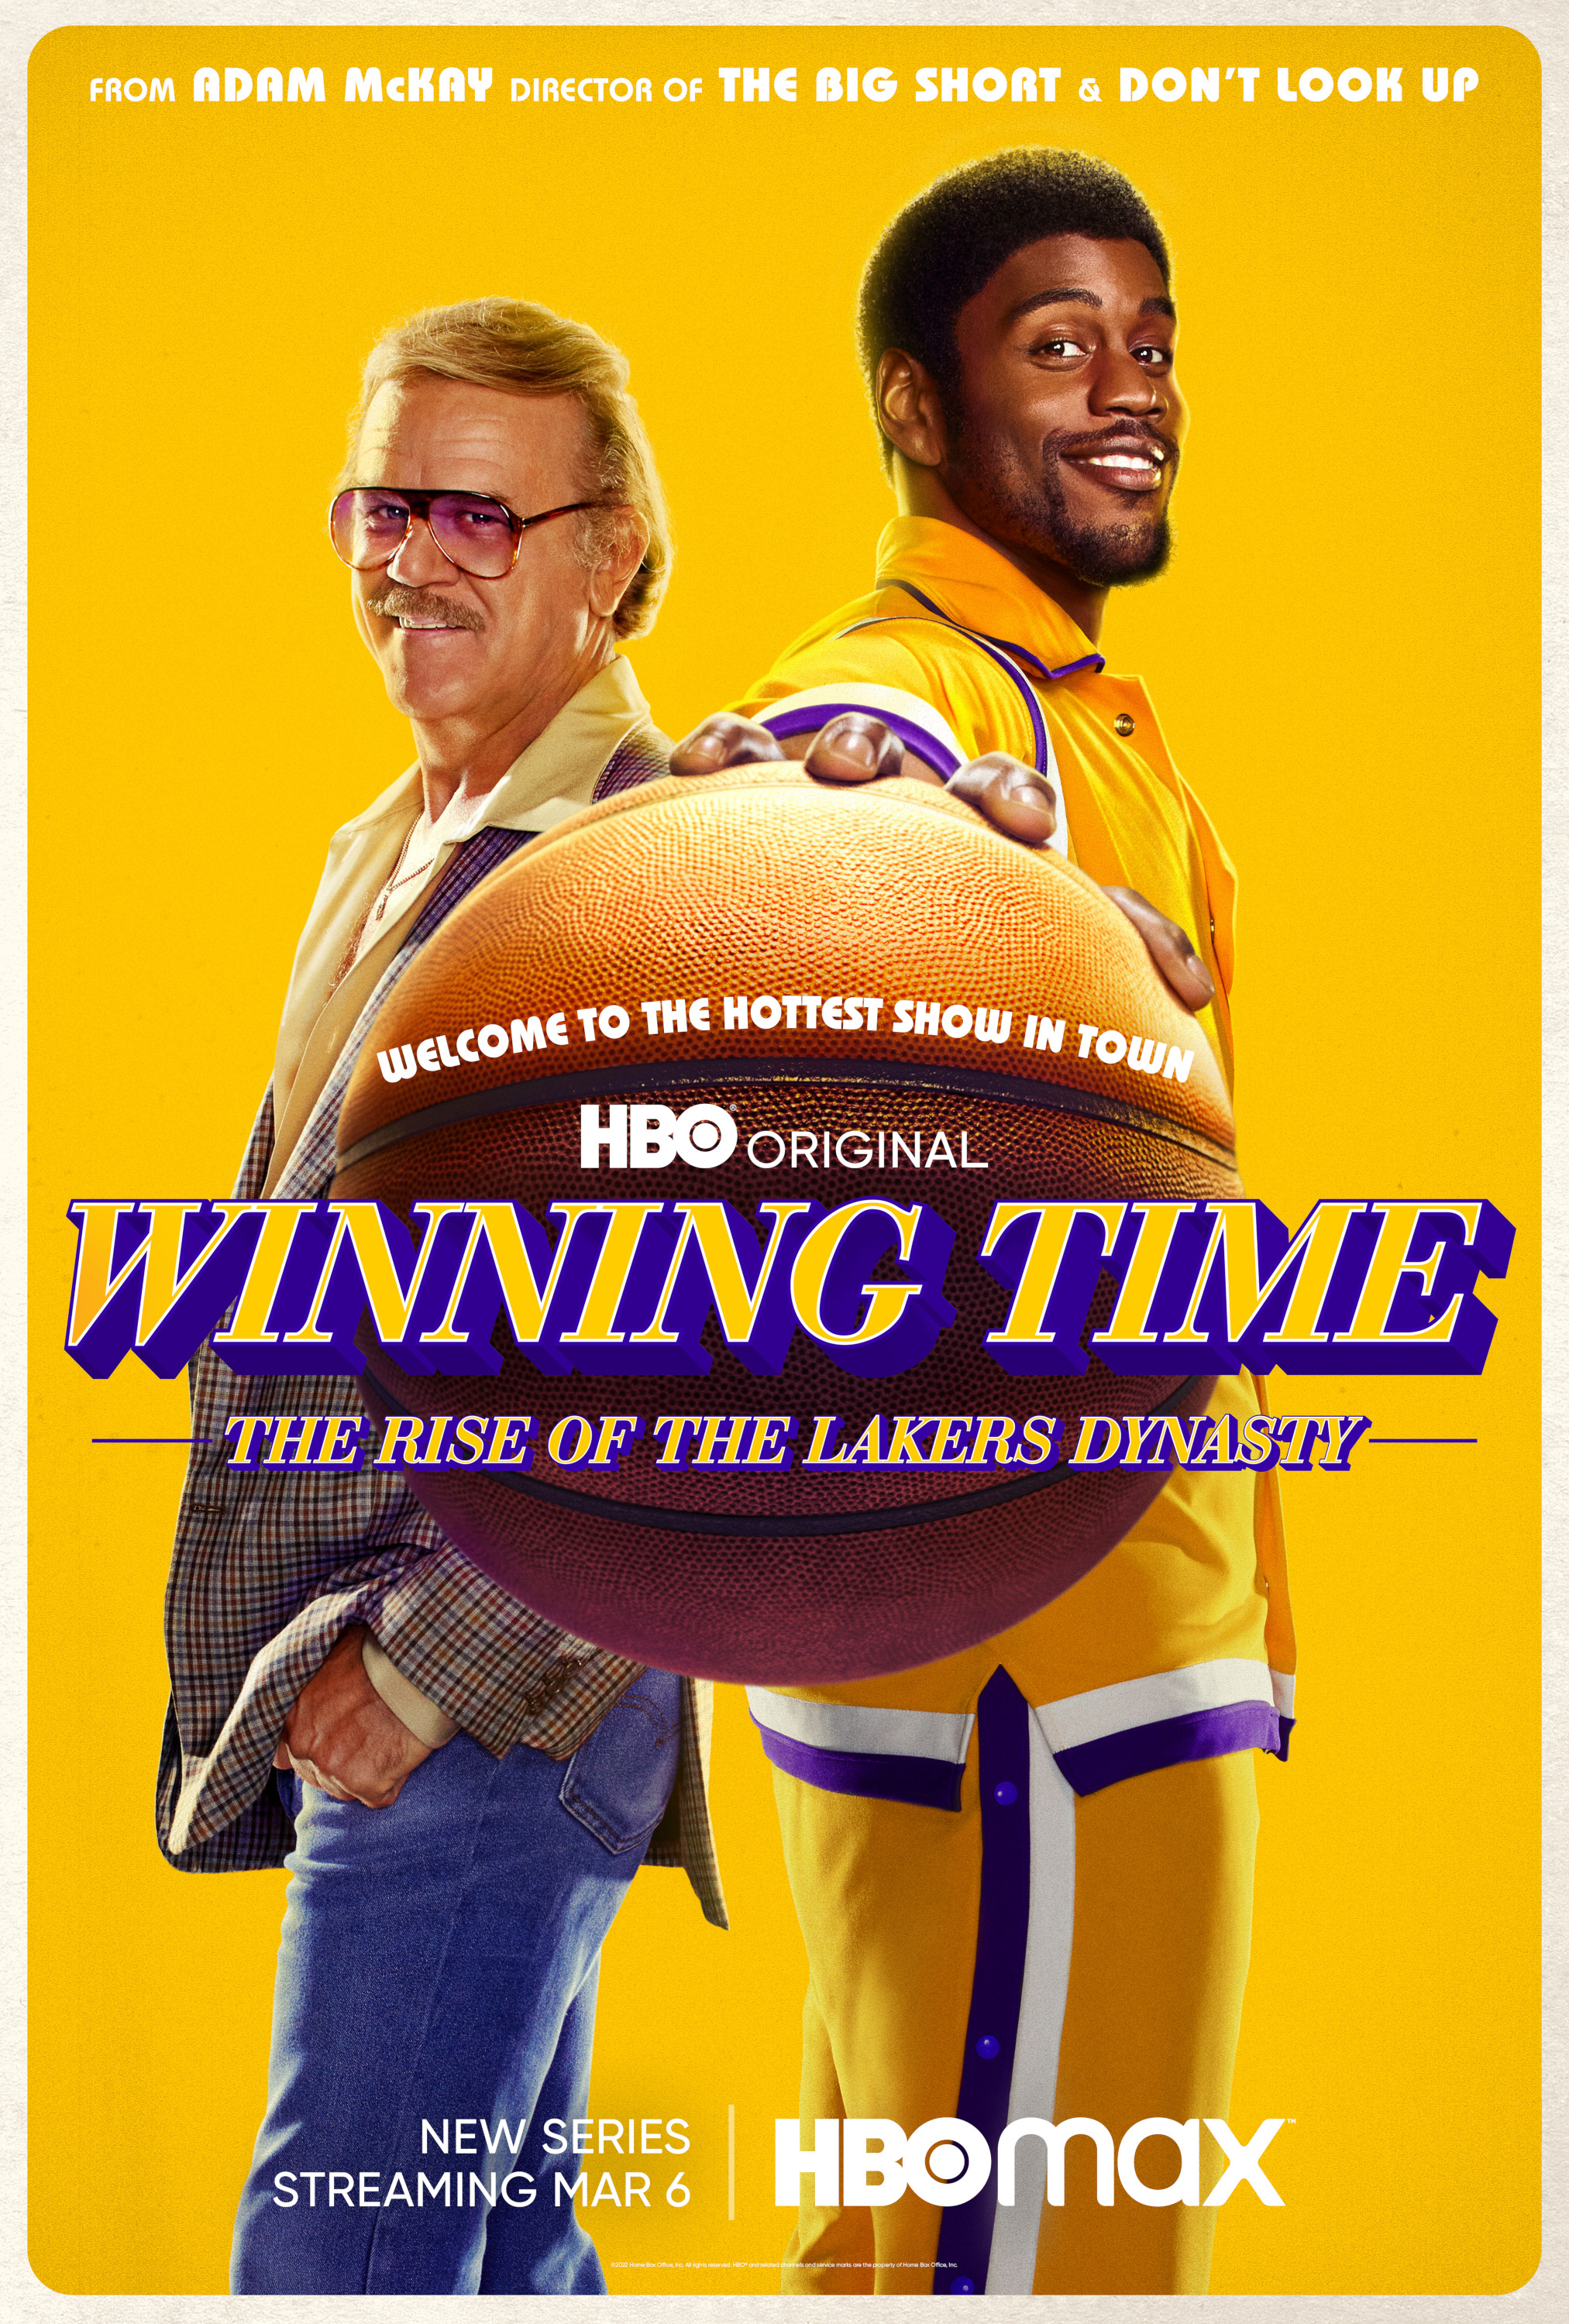 Sanktion score umoral Winning Time: The Rise of the Lakers Dynasty subtitles | 2 Available